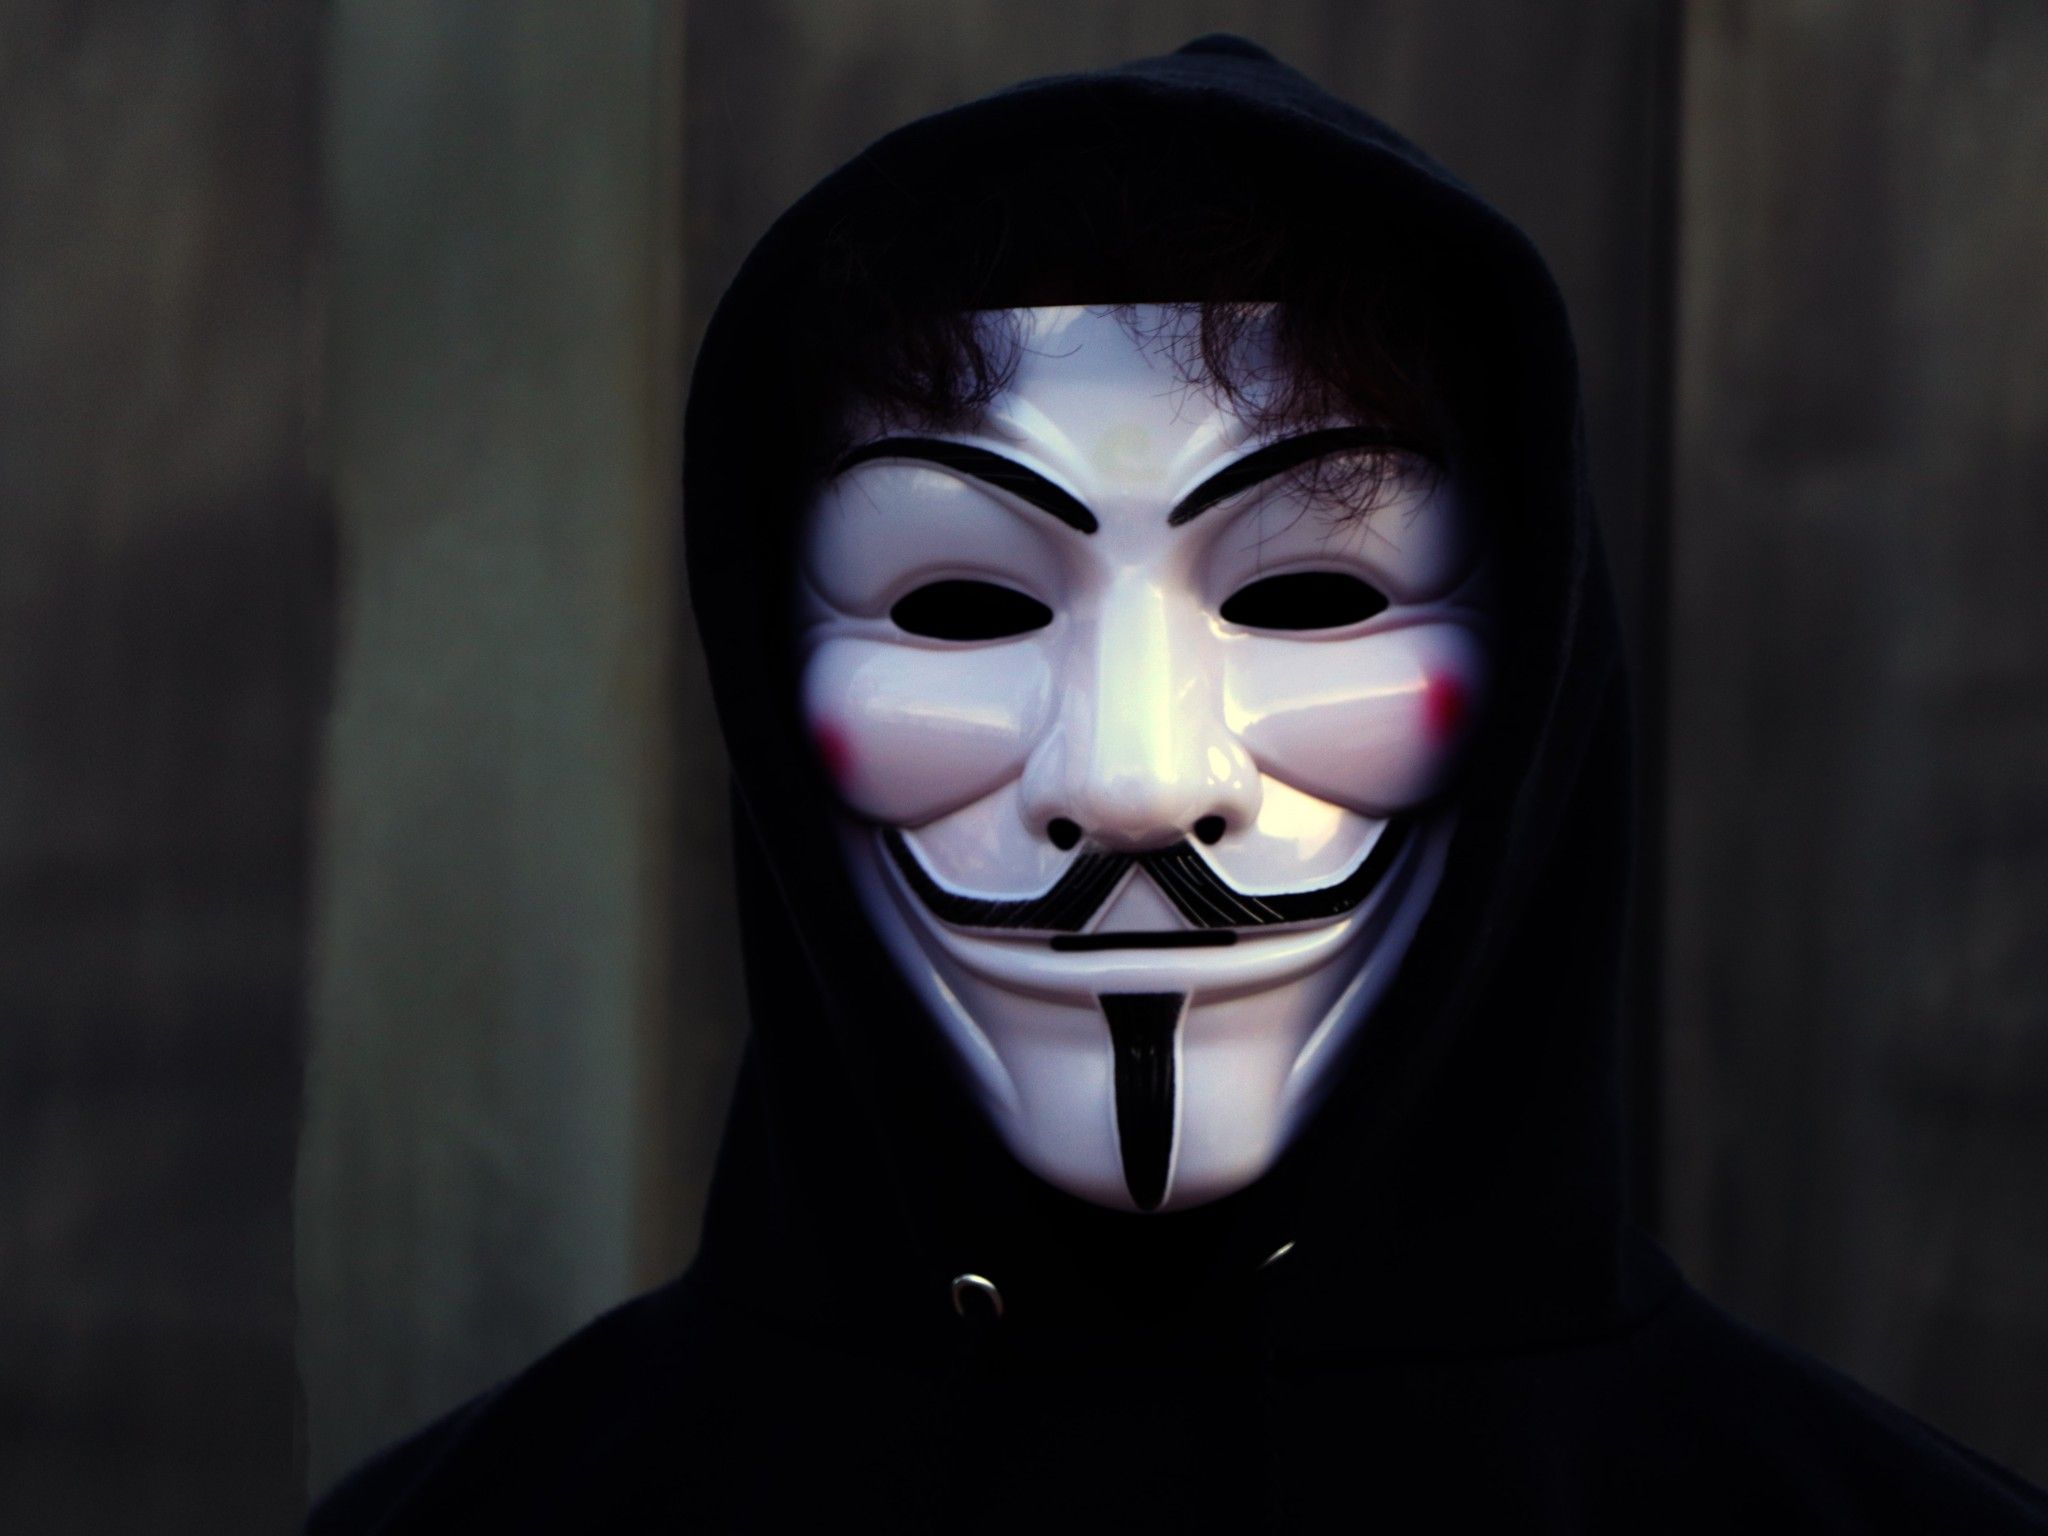 Man in Mask 4K Wallpaper, Anonymous, White masks, Black Hoodie, Guy Fawkes mask, 5K, Photography